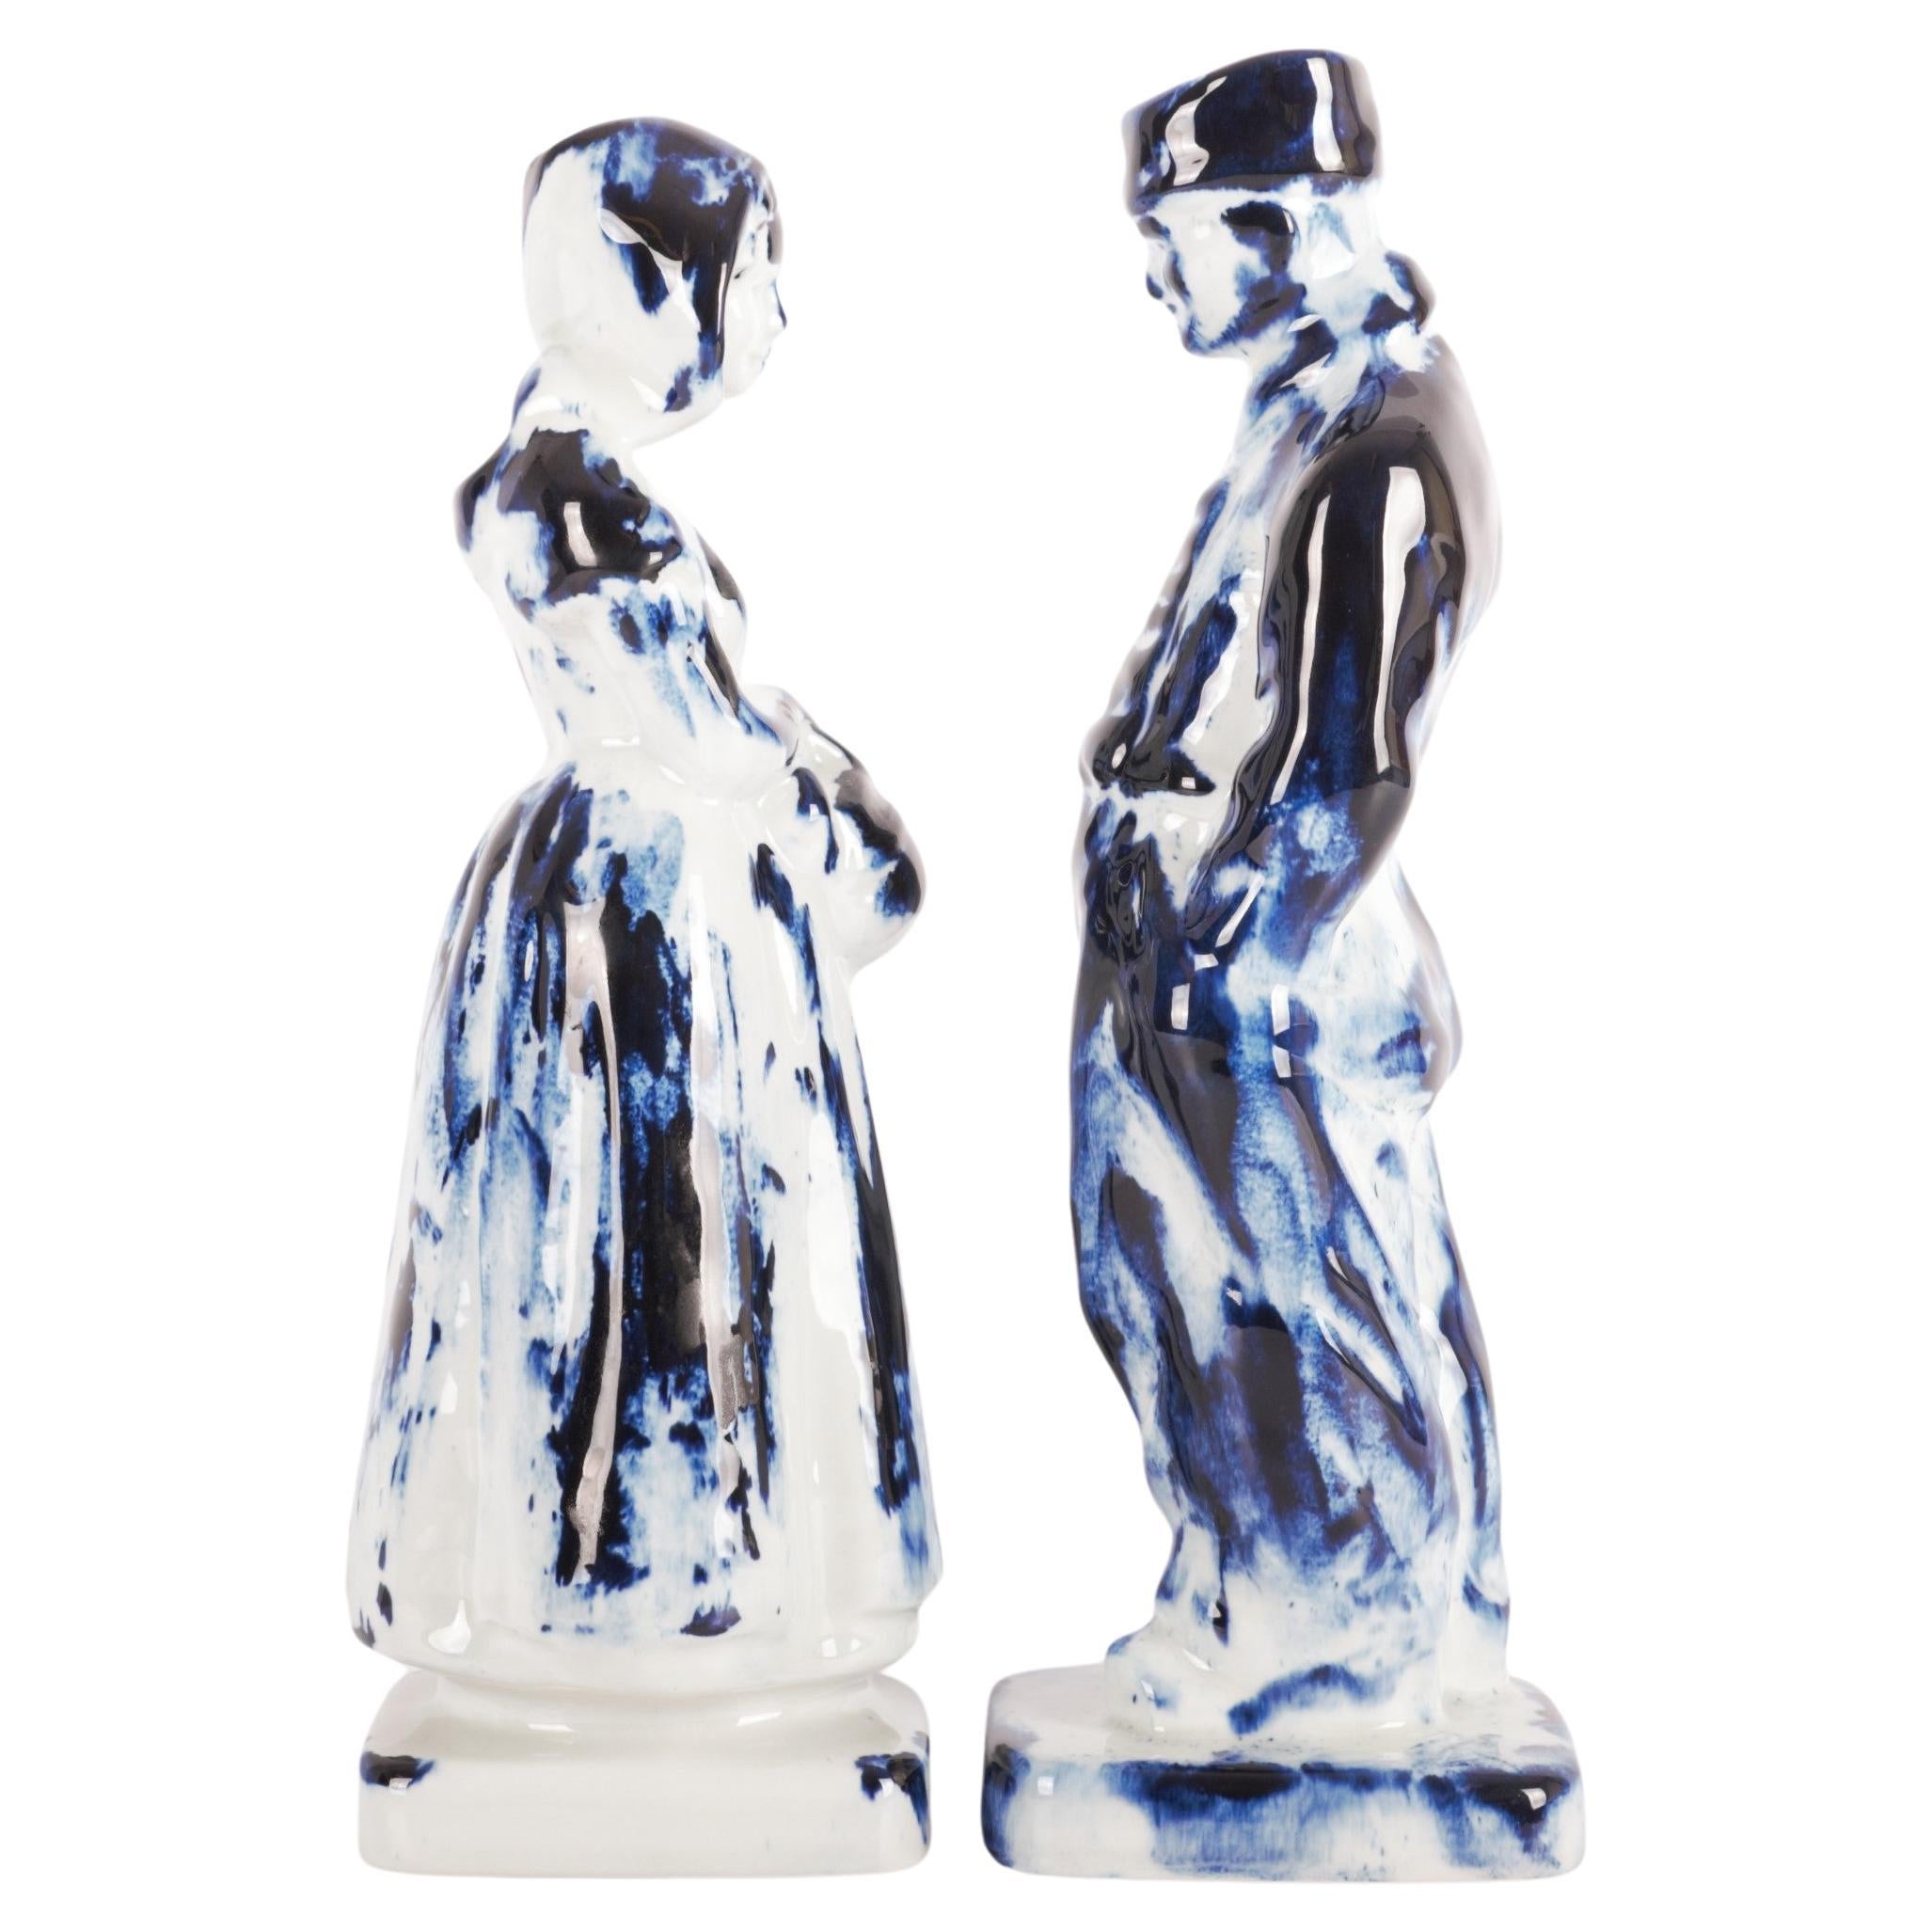 Delft Blue Farmer & Farmer Wife #3, by Marcel Wanders, Hand Painted, 2006 Unique For Sale